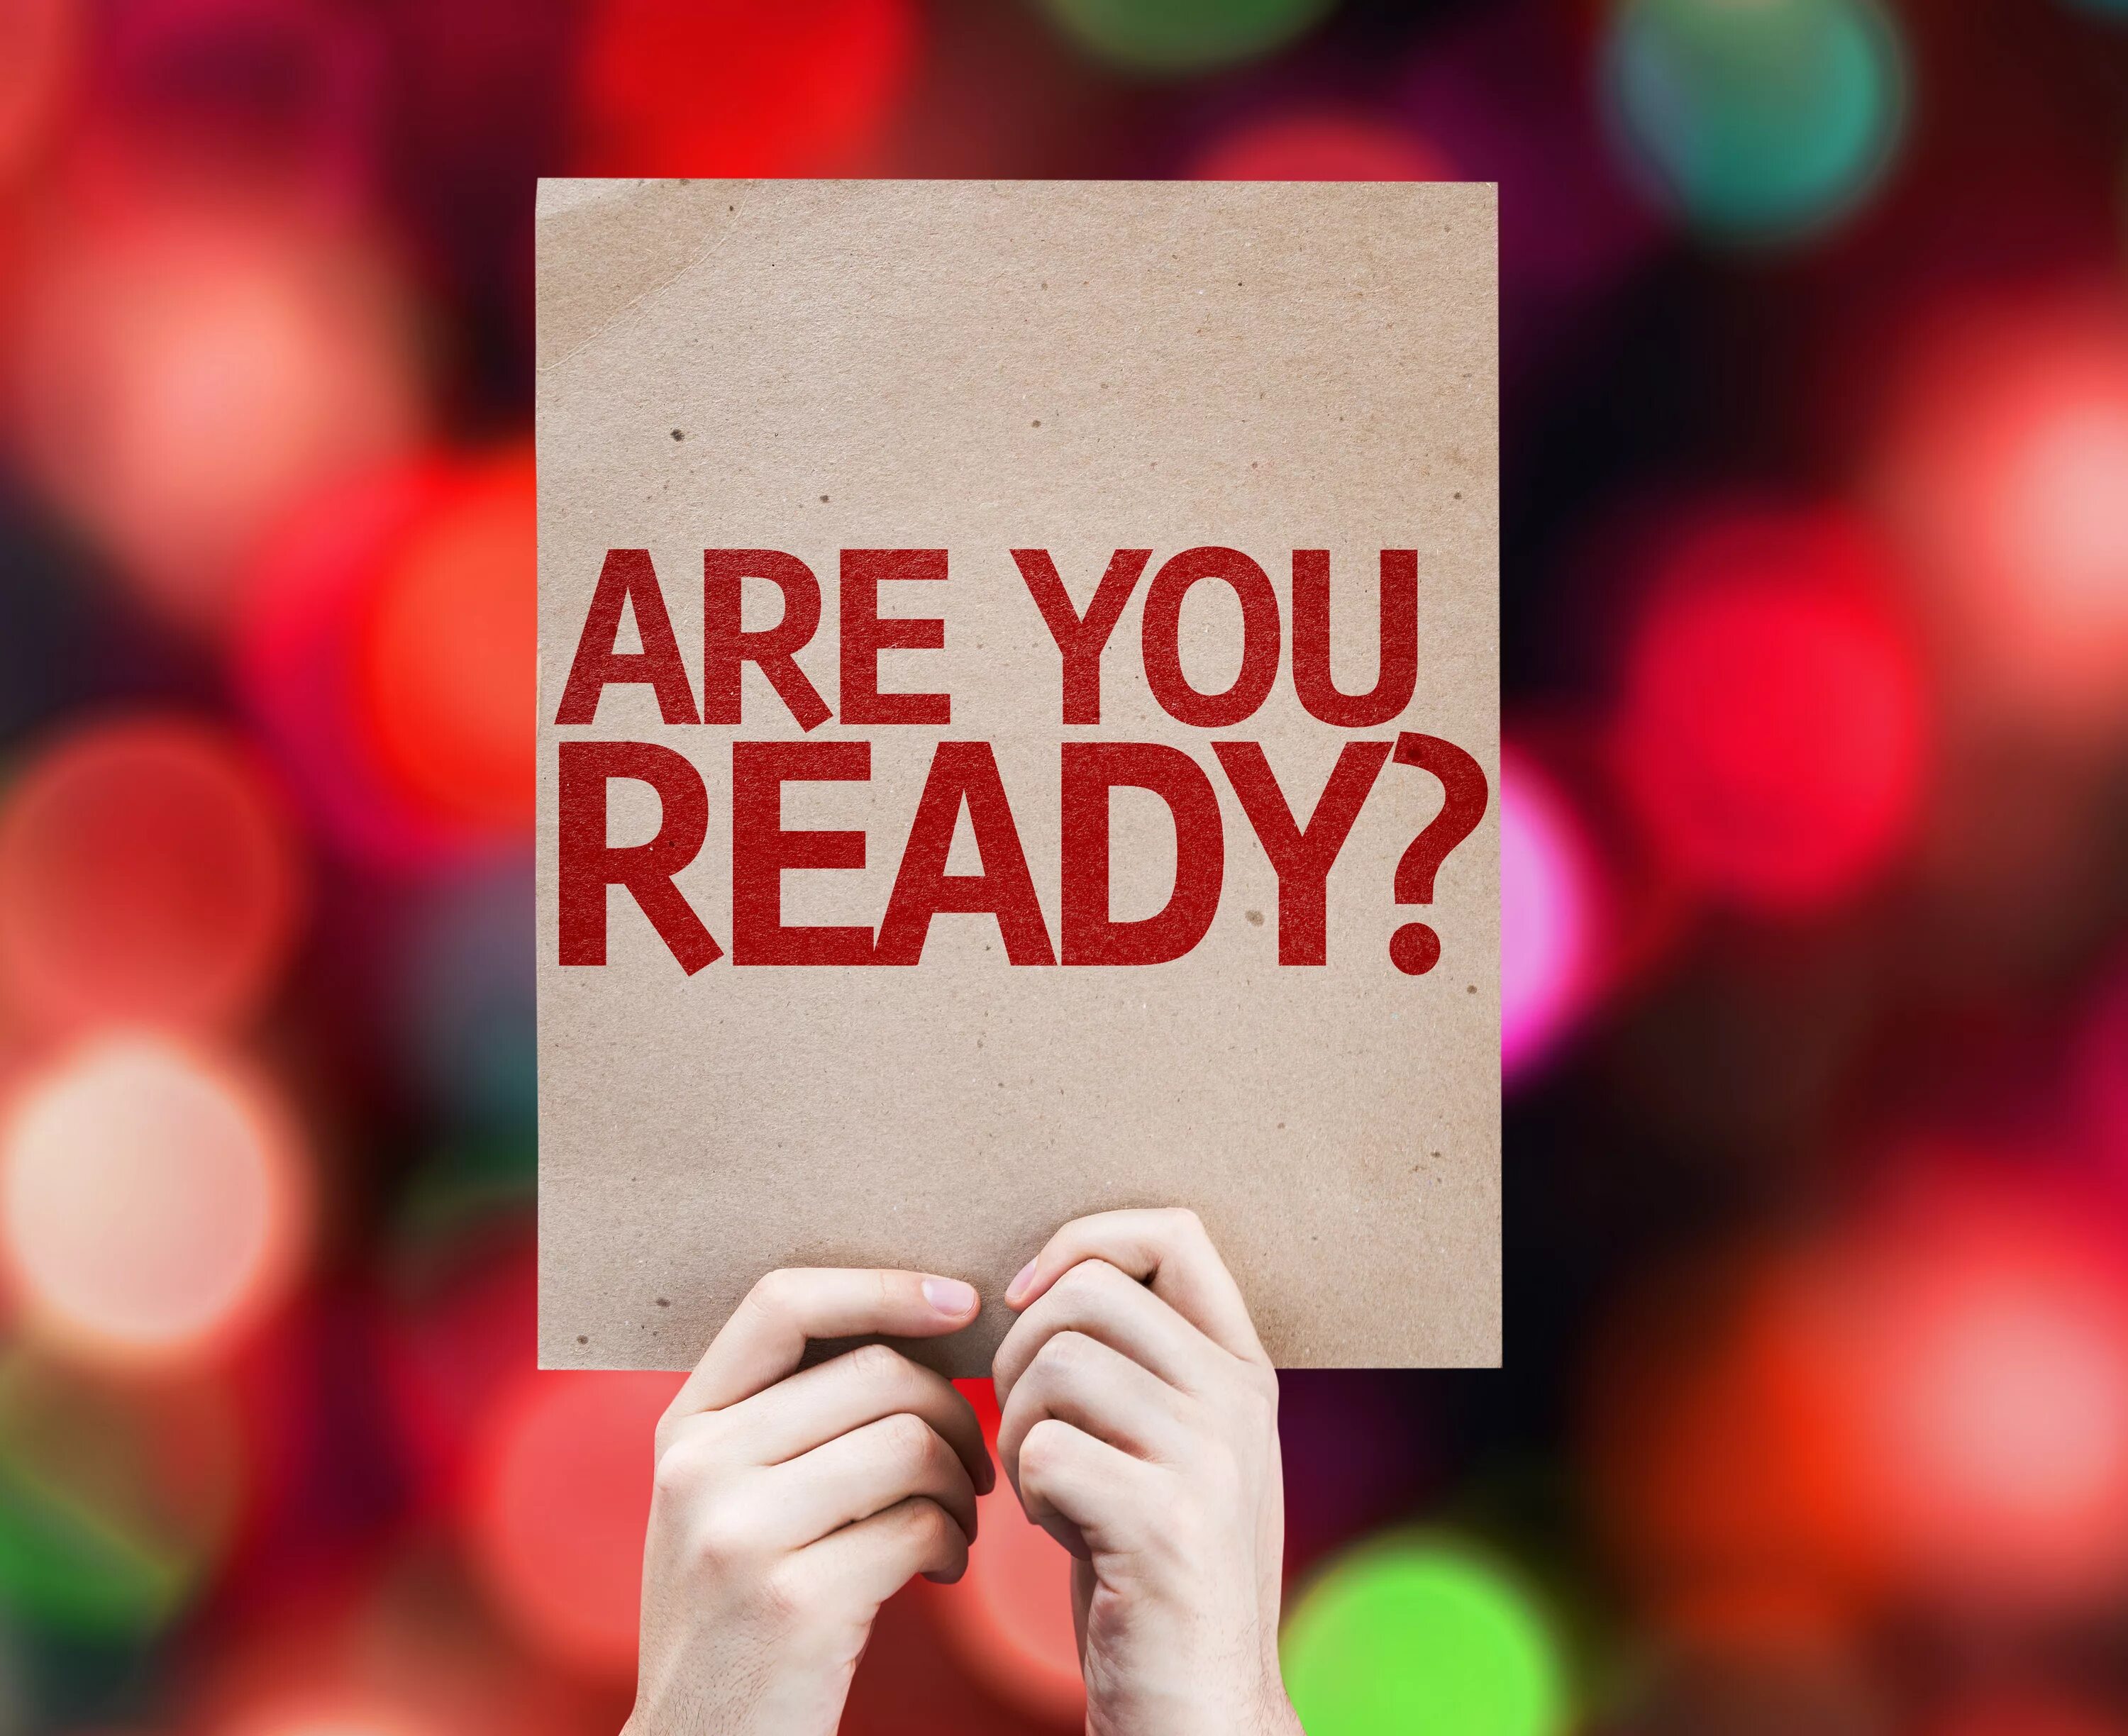 Are you ready. Are you ready картинка. Are you ready ? Фото. Are you ready картинки стильные. Are you ready ordering